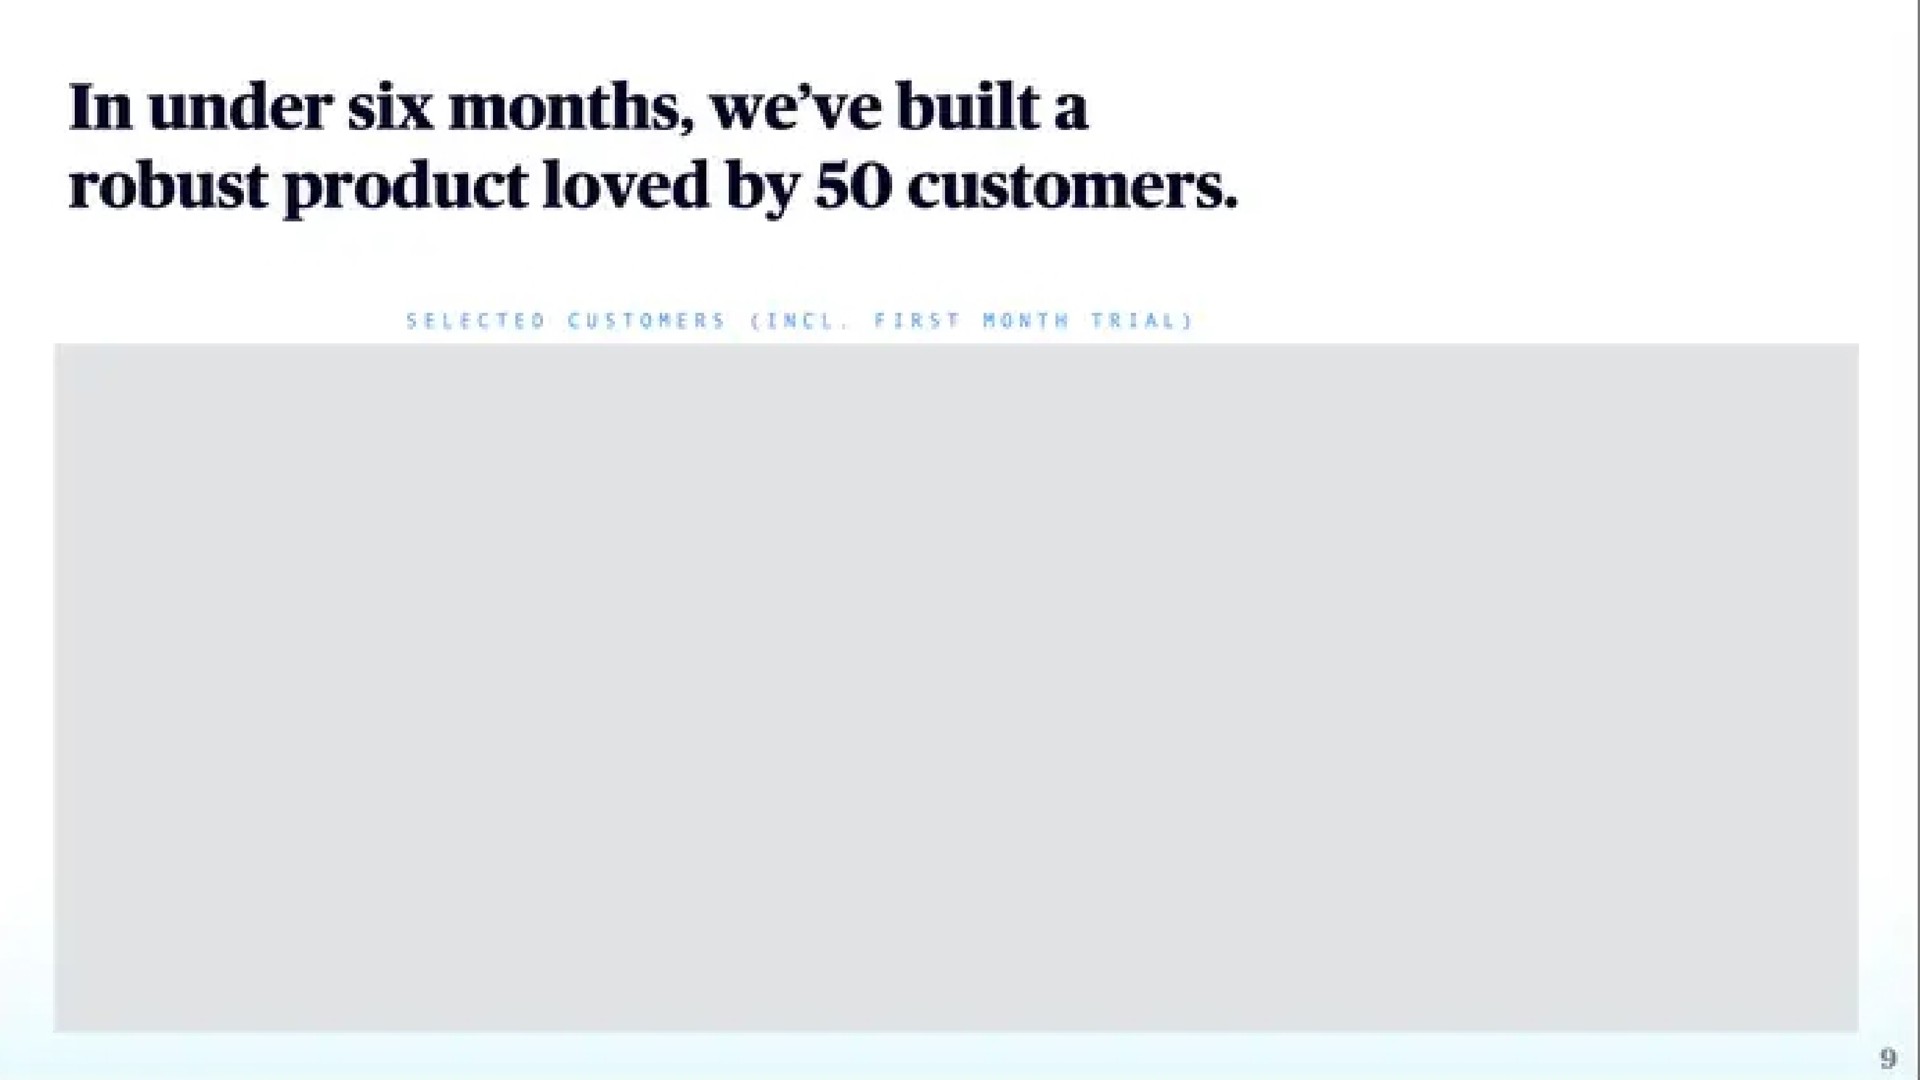 in under six months we built a robust product loved by customers | Almanac